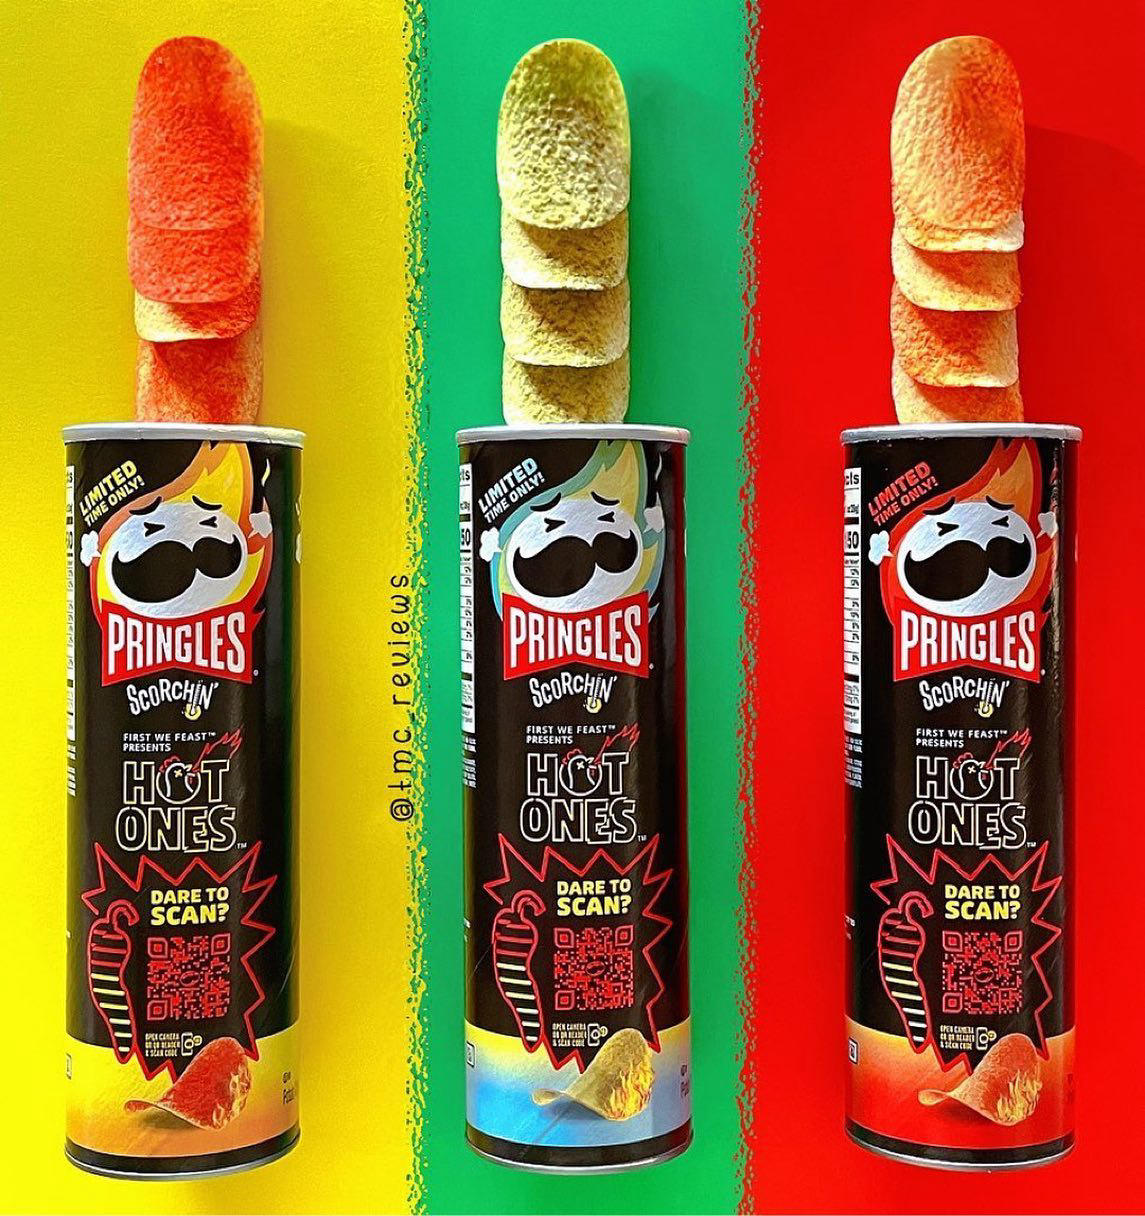 image  1 Pringles - What’s the hottest level of #Pringles #HotOnes you’ve been able to handle